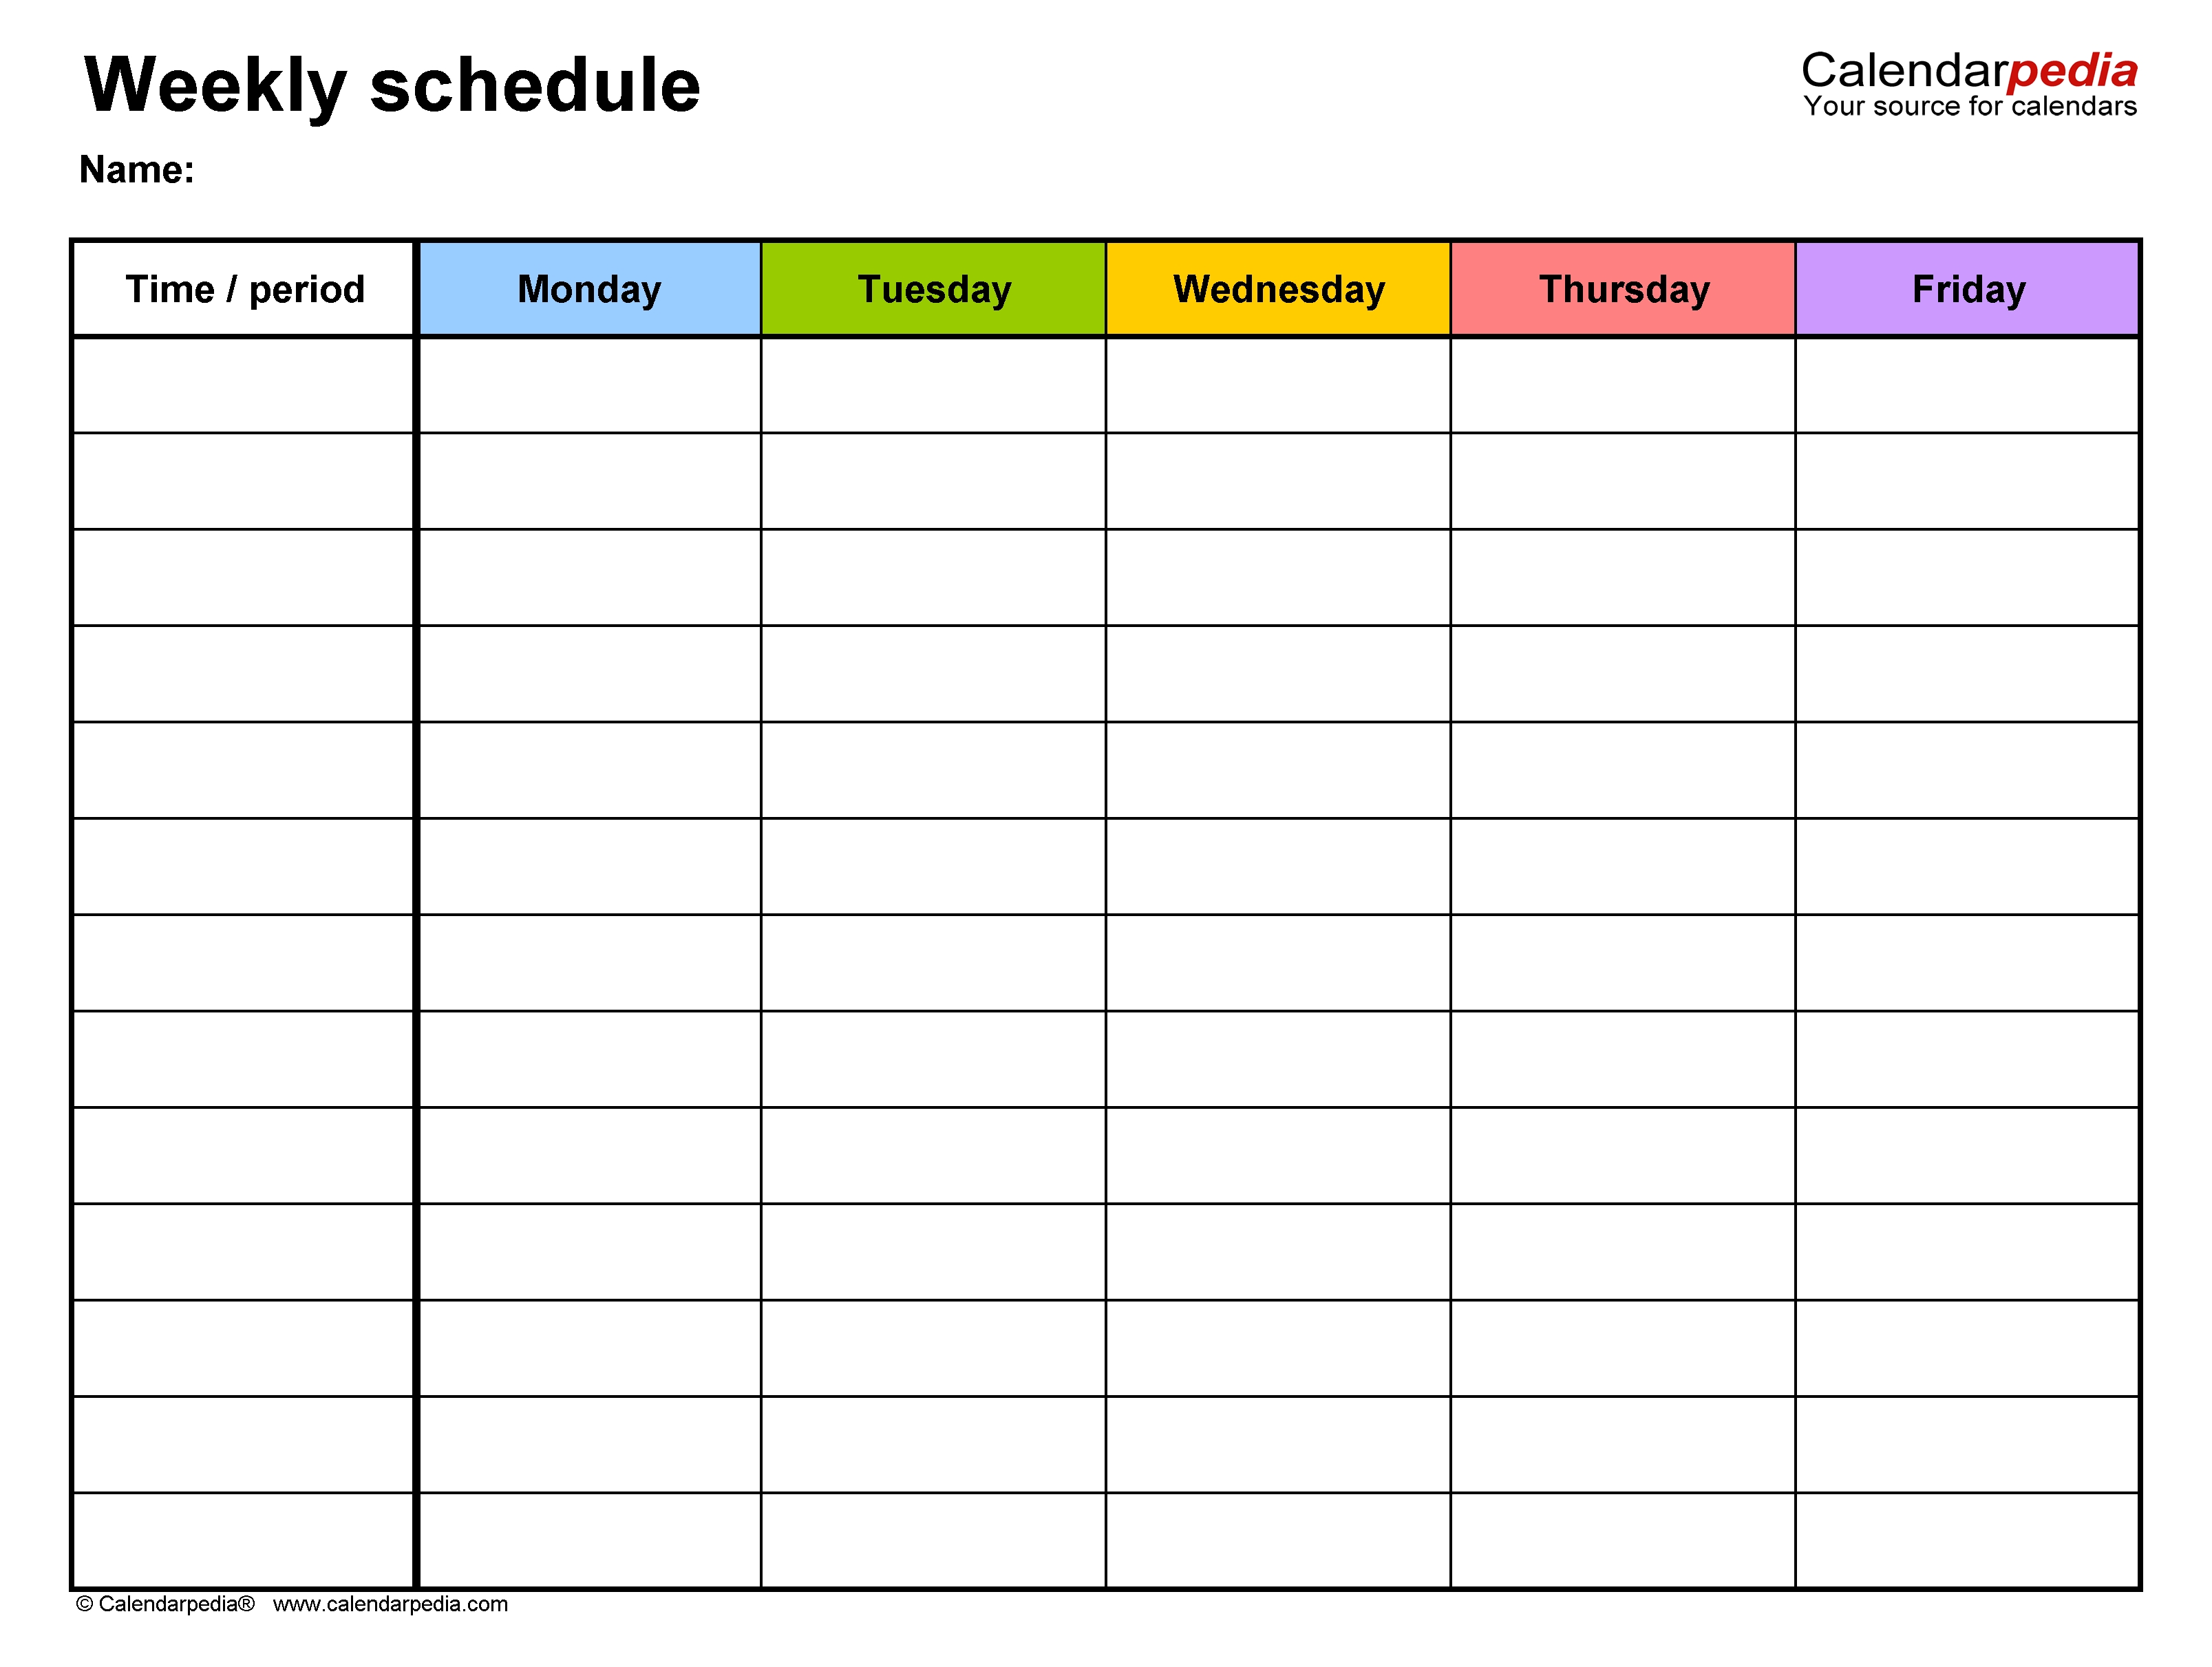 Free Weekly Schedule Templates For Word - 18 Templates-Free Blank Printable Monthly Calendar Monday - Friday